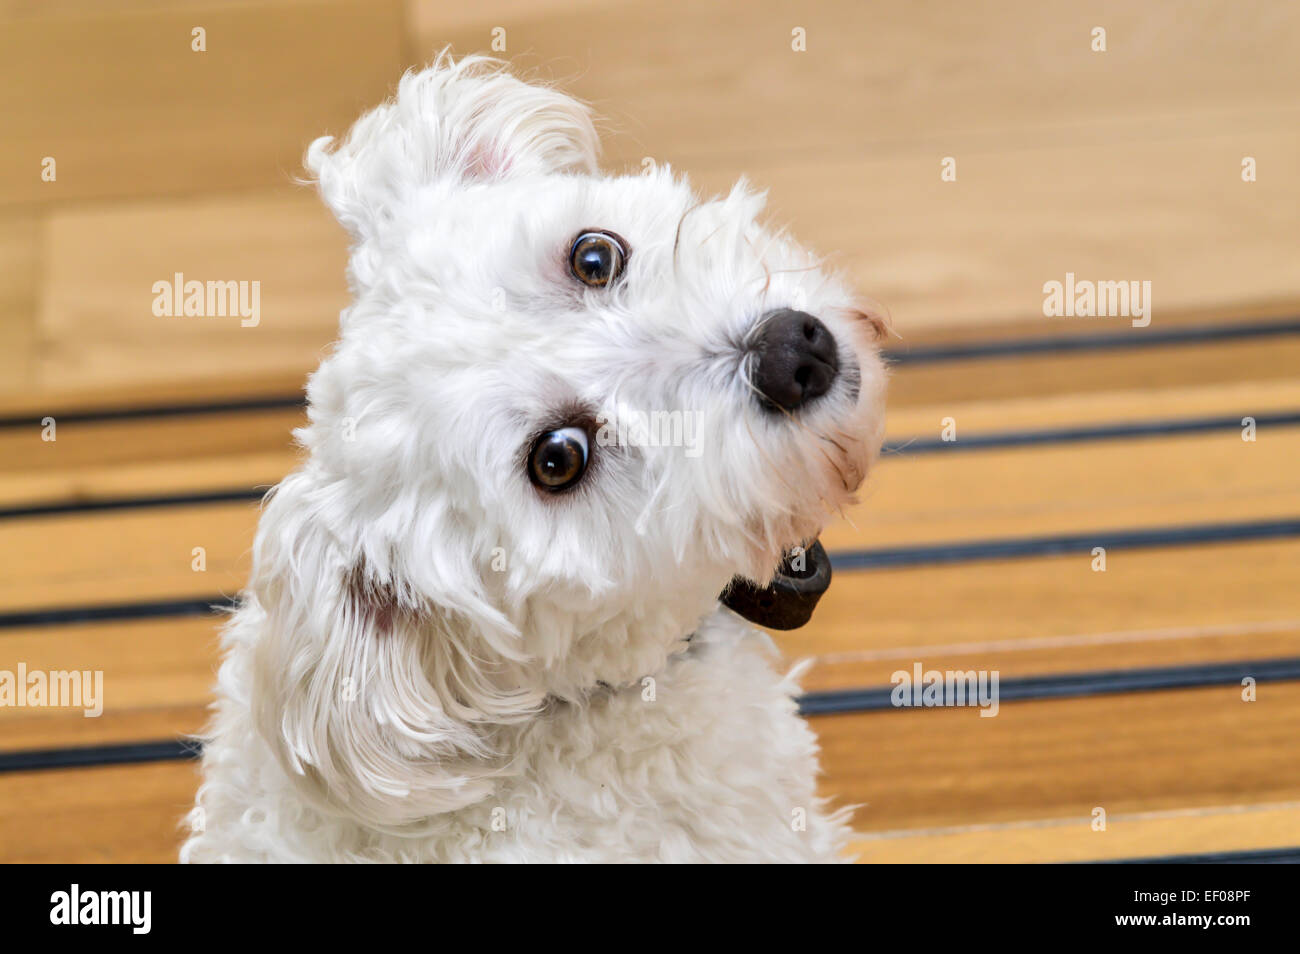 Cute white dog with head turned Stock Photo